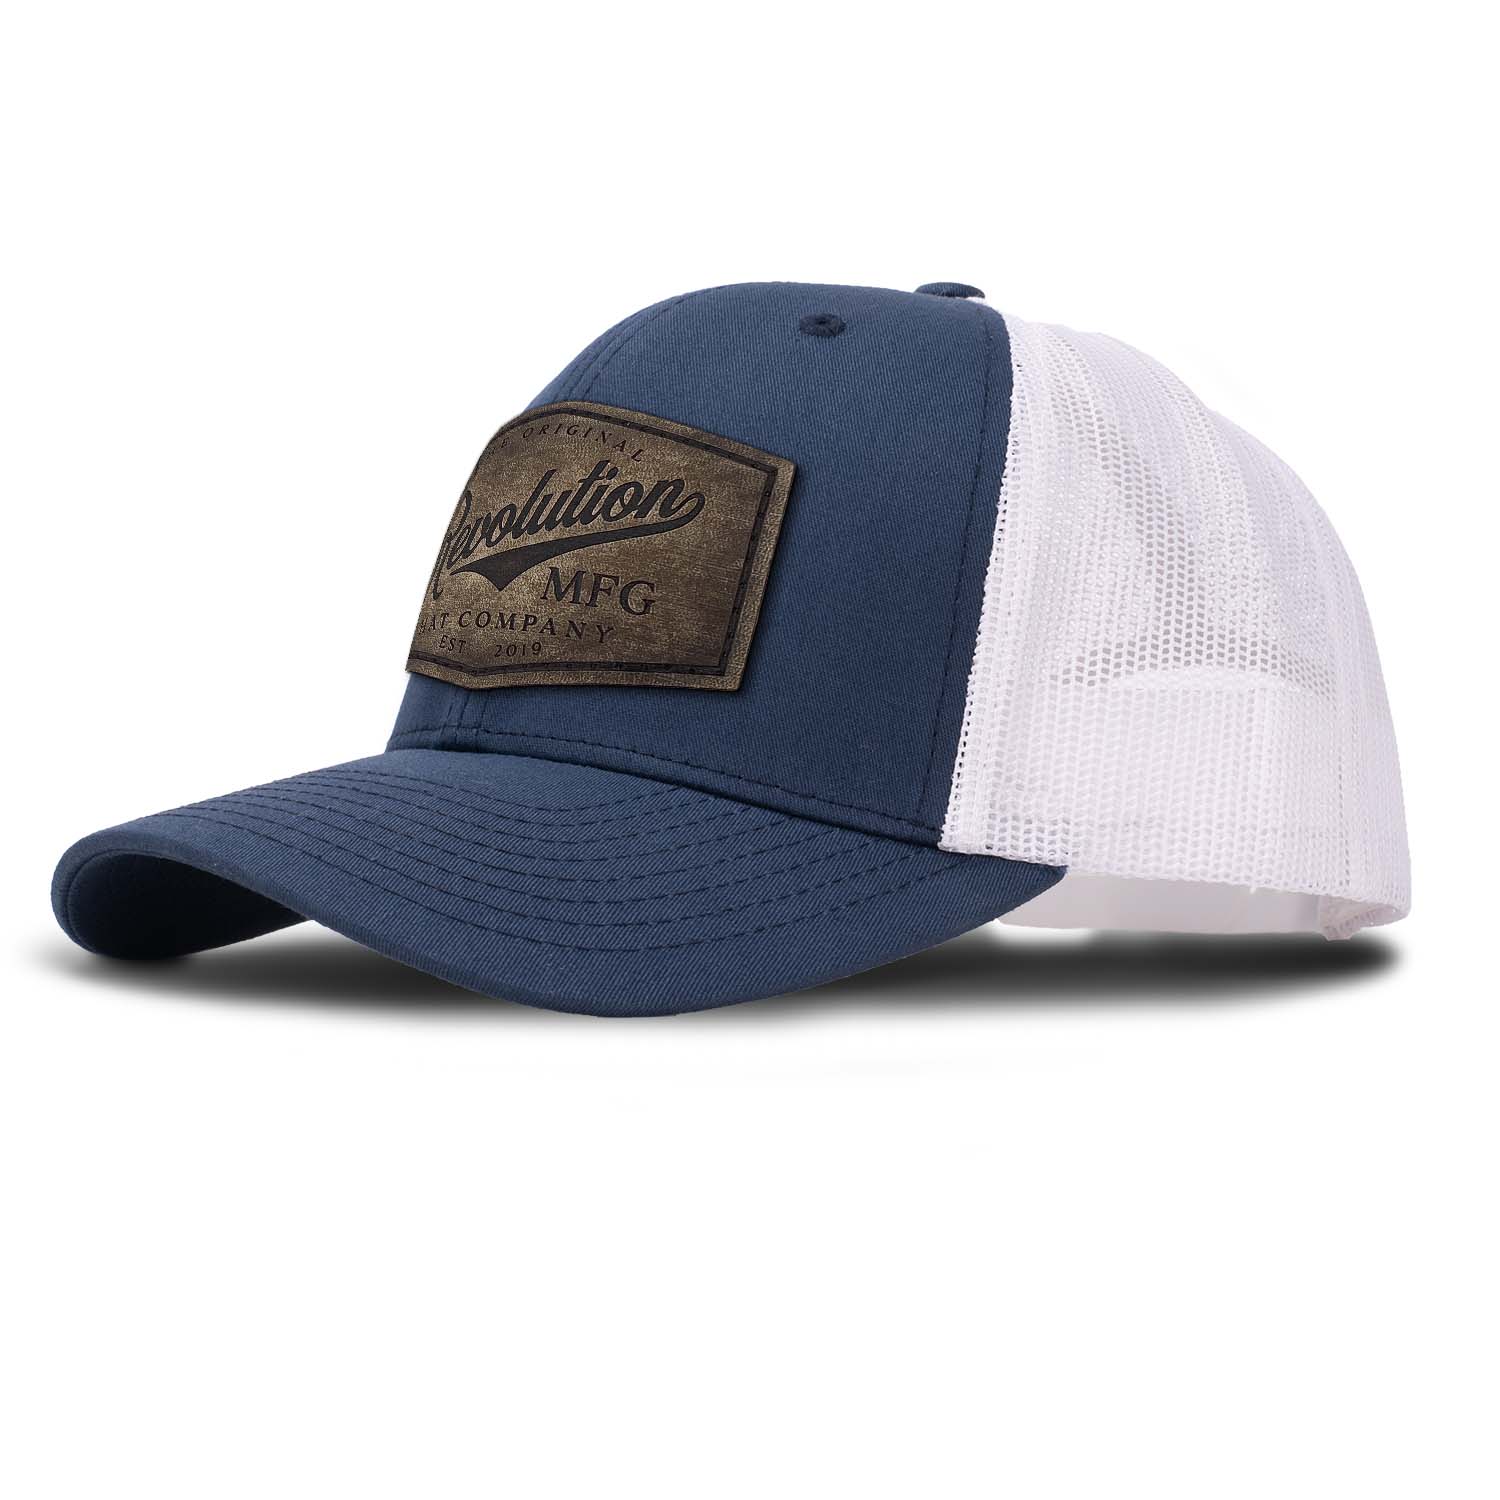 Revolution Hat Co full grain leather patch in a vintage finish on a navy with white mesh classic trucker hat